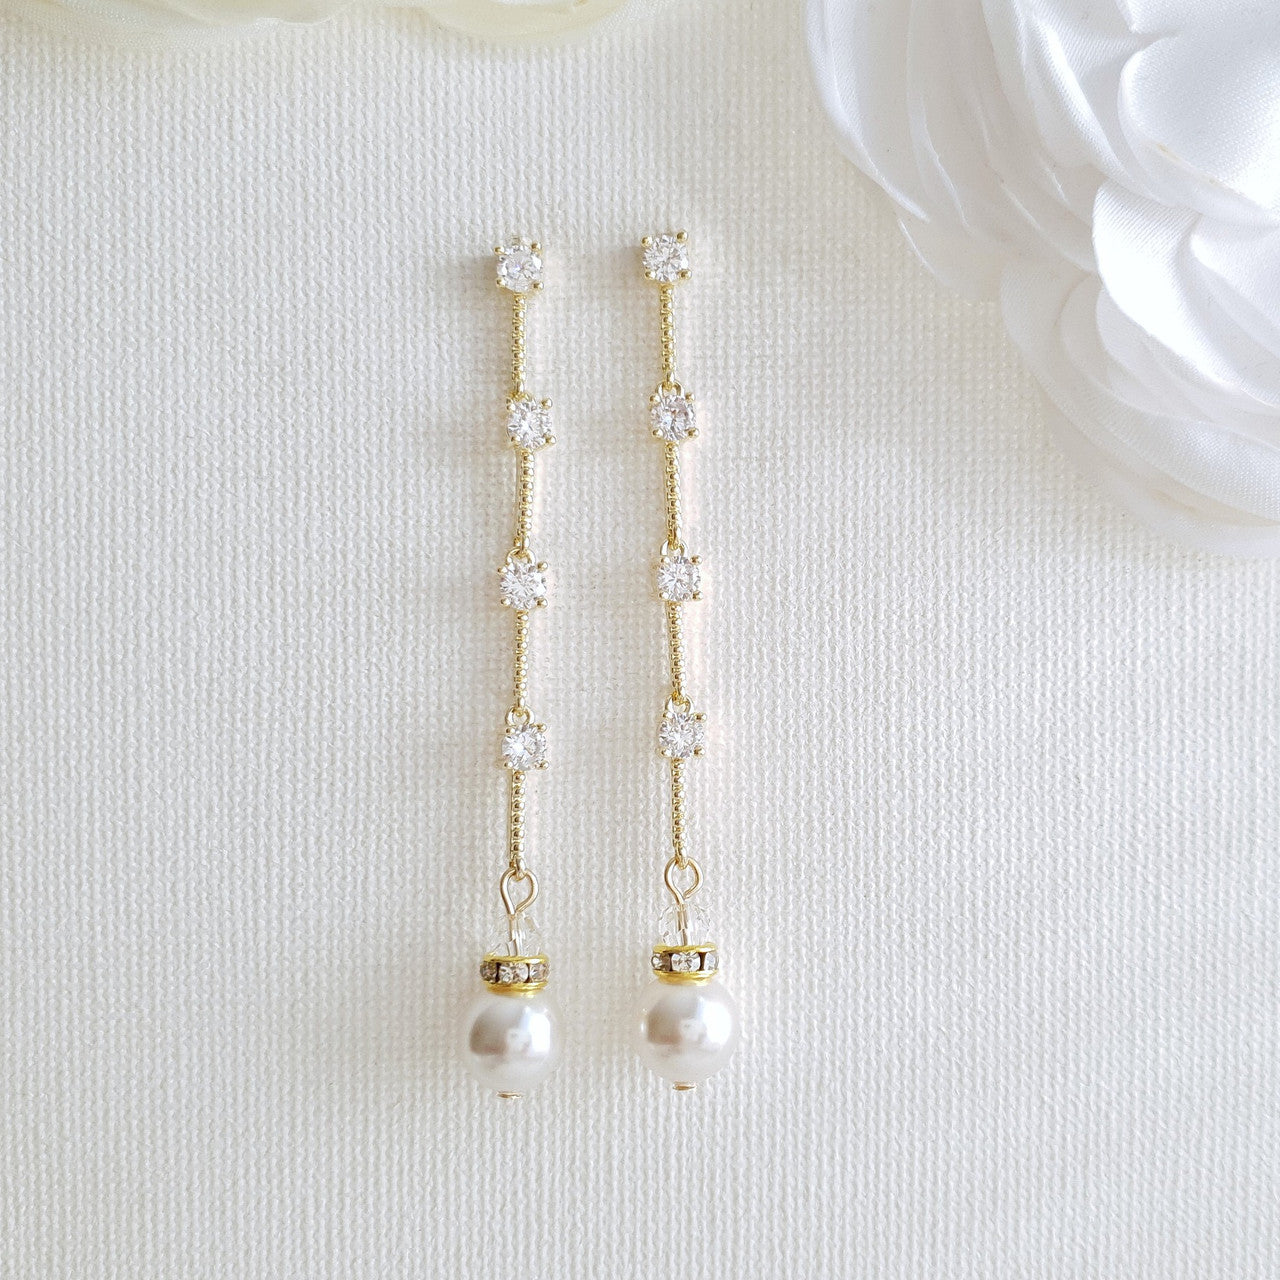 Gold Jewellery Set with Pearl Drop Earrings Necklace Bracelet-Ginger